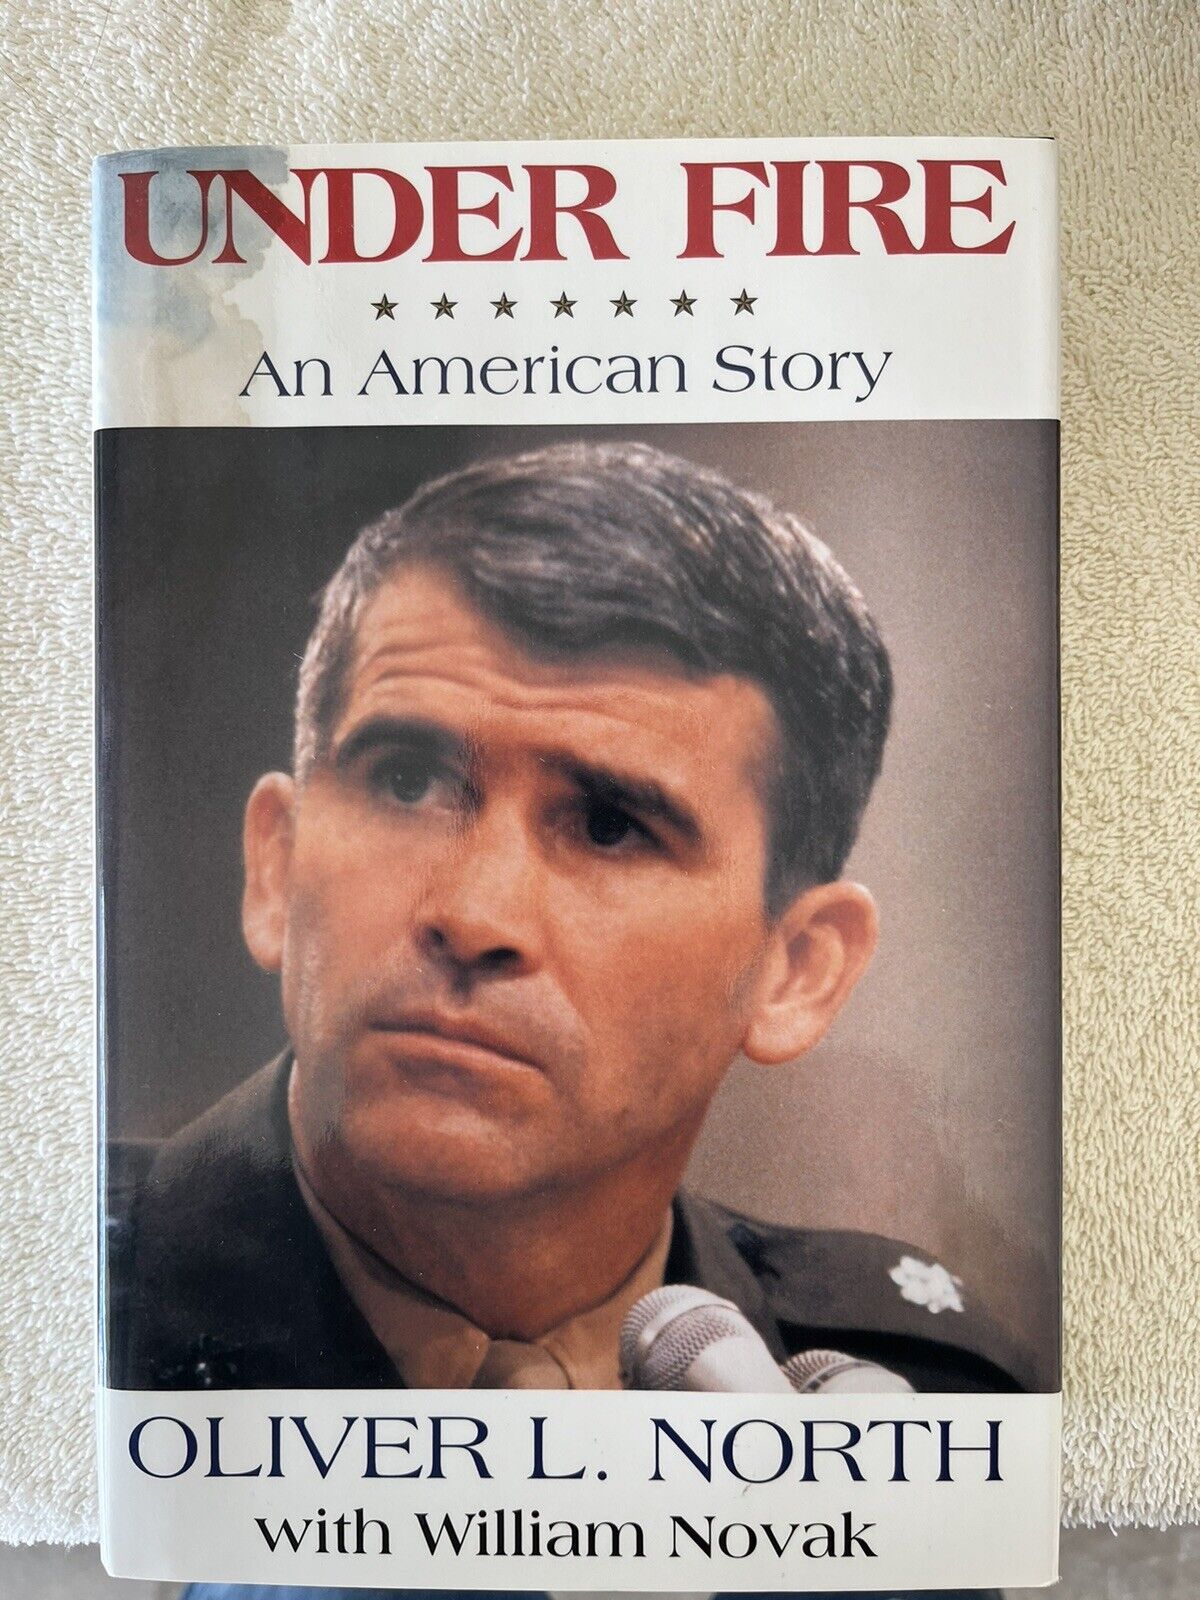 Oliver North signed Autobiography - Under Fire.   Excellent condition.